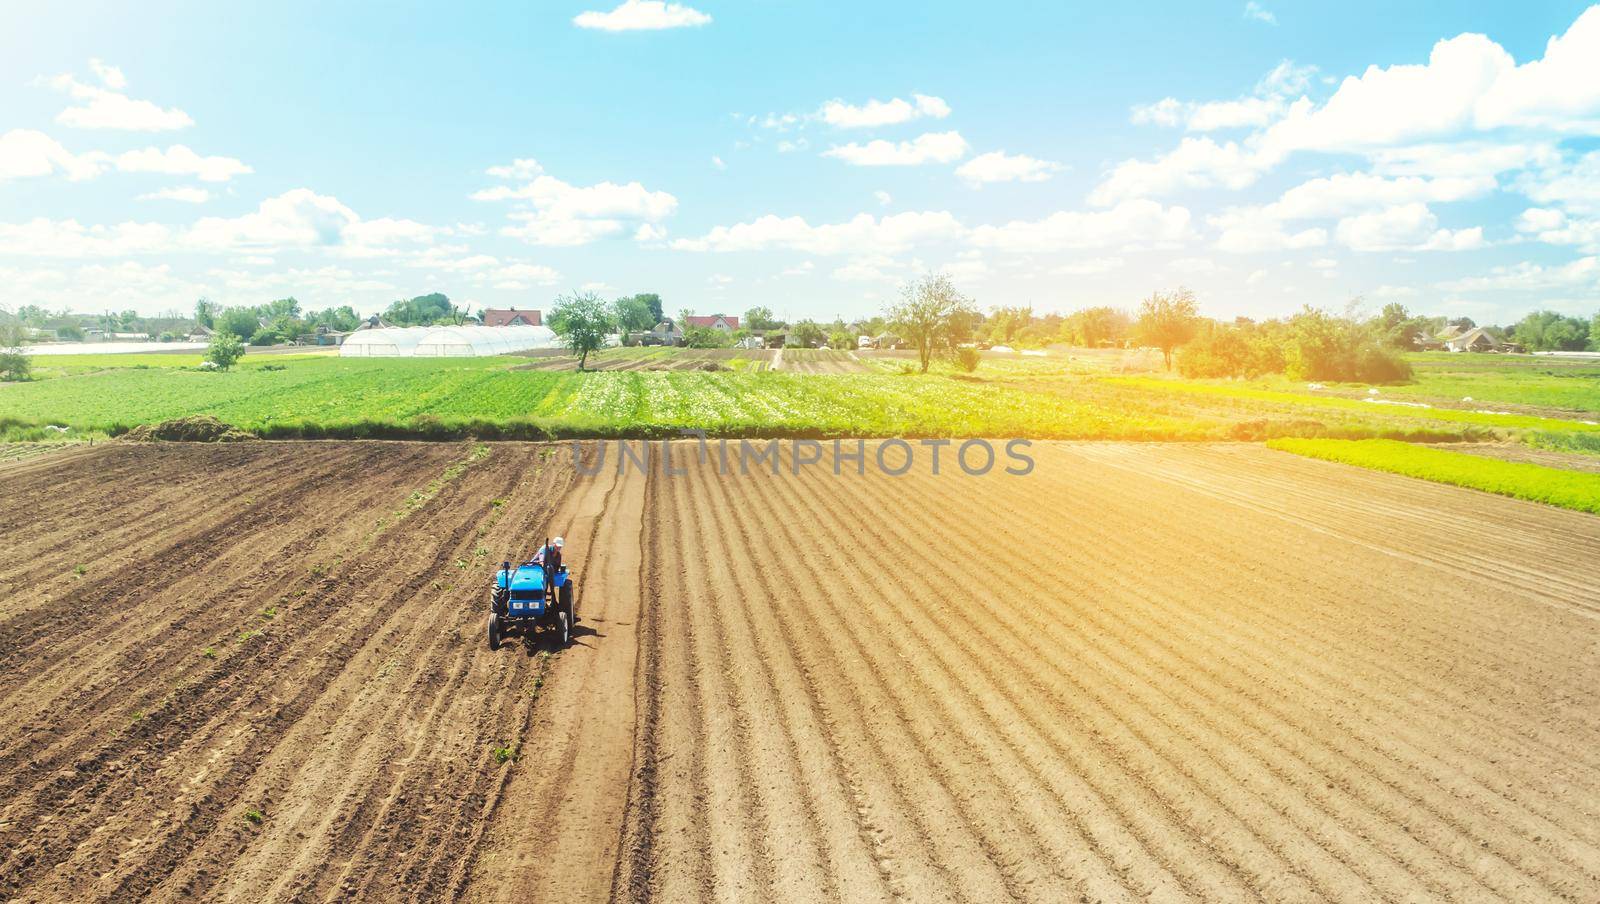 Farmer on tractor loosens and grinds the soil. Preparing the land for a new crop planting. Farming and agriculture. agricultural sector of the economy. Loosening the surface, cultivating the land.